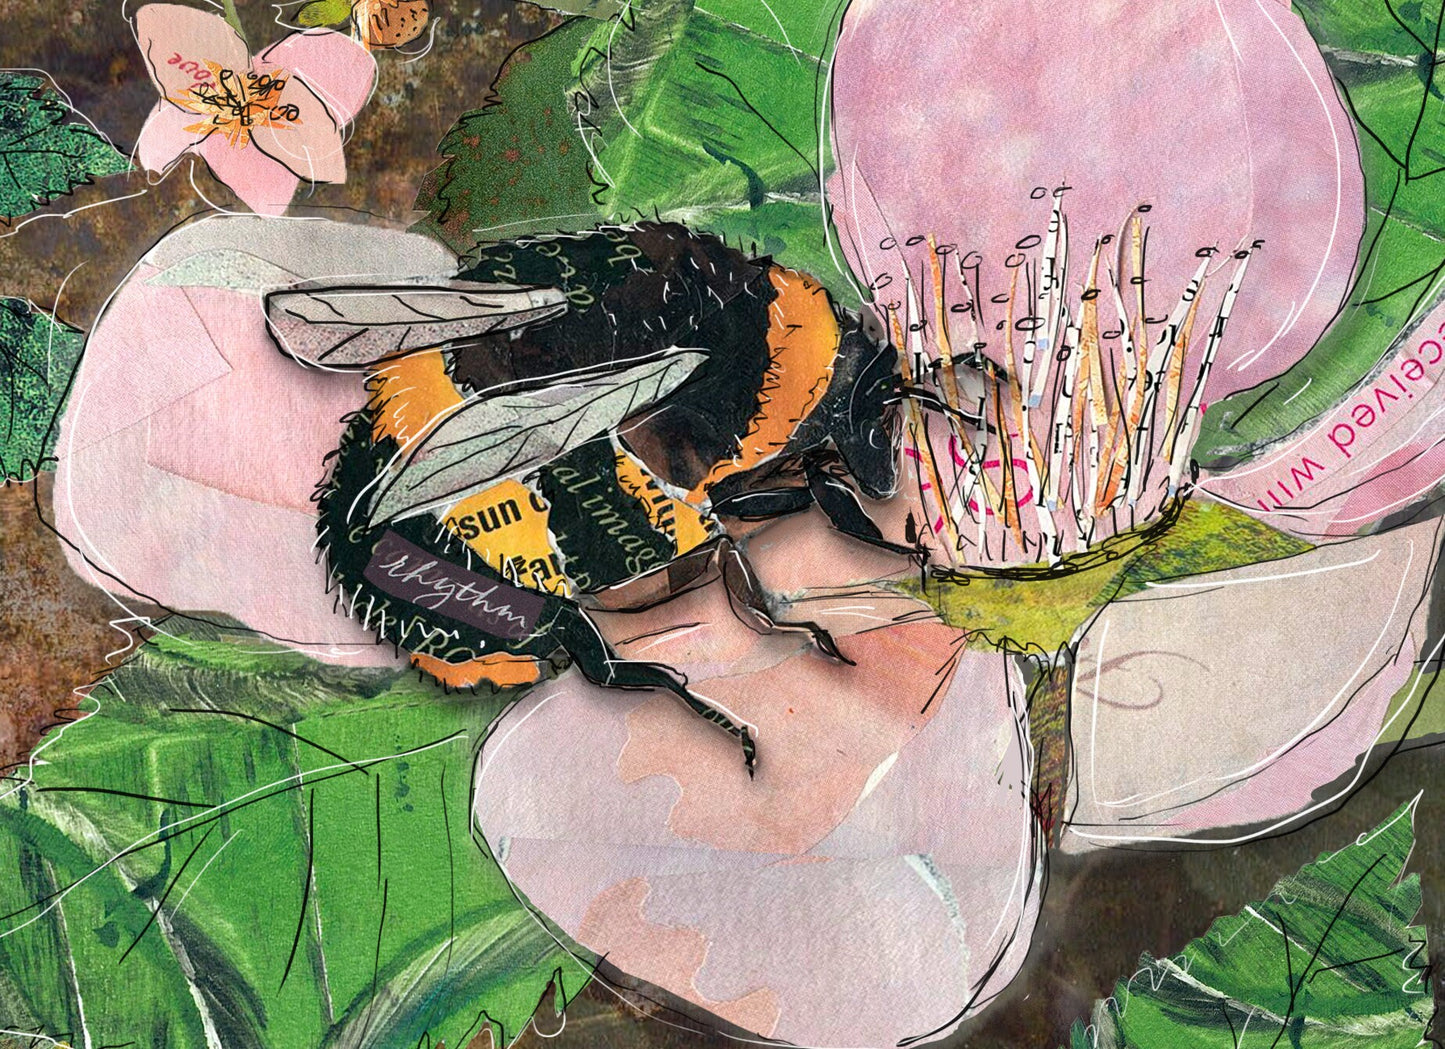 8x10 Art Print of a mixed media collage of a bumble bee pollenating blackberry flowers, frog hiding among leaves